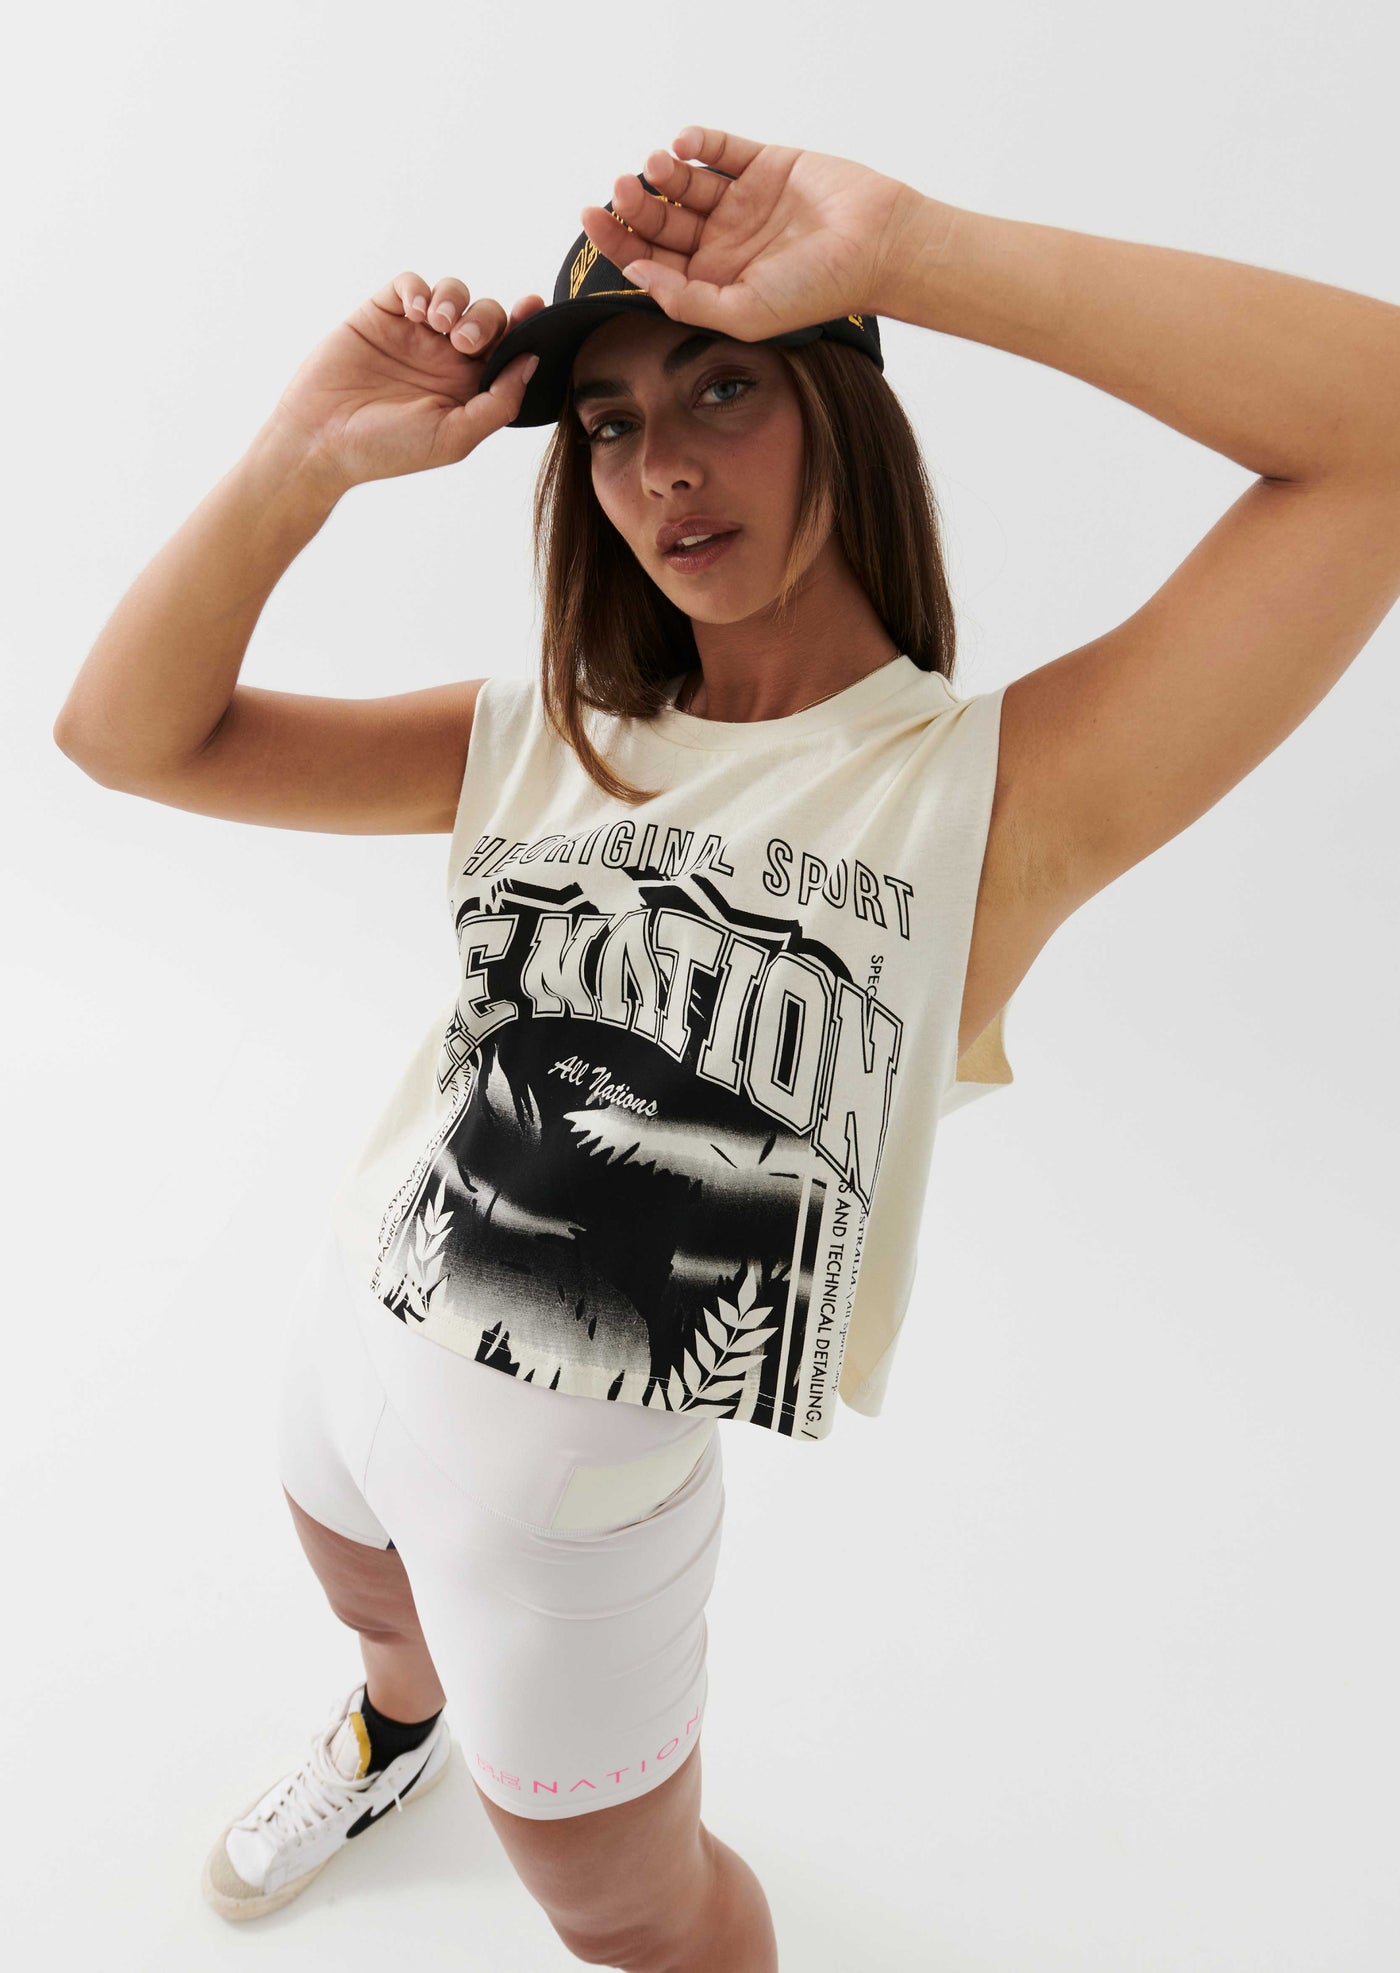 LAYBACK TANK IN WINTER WHITE